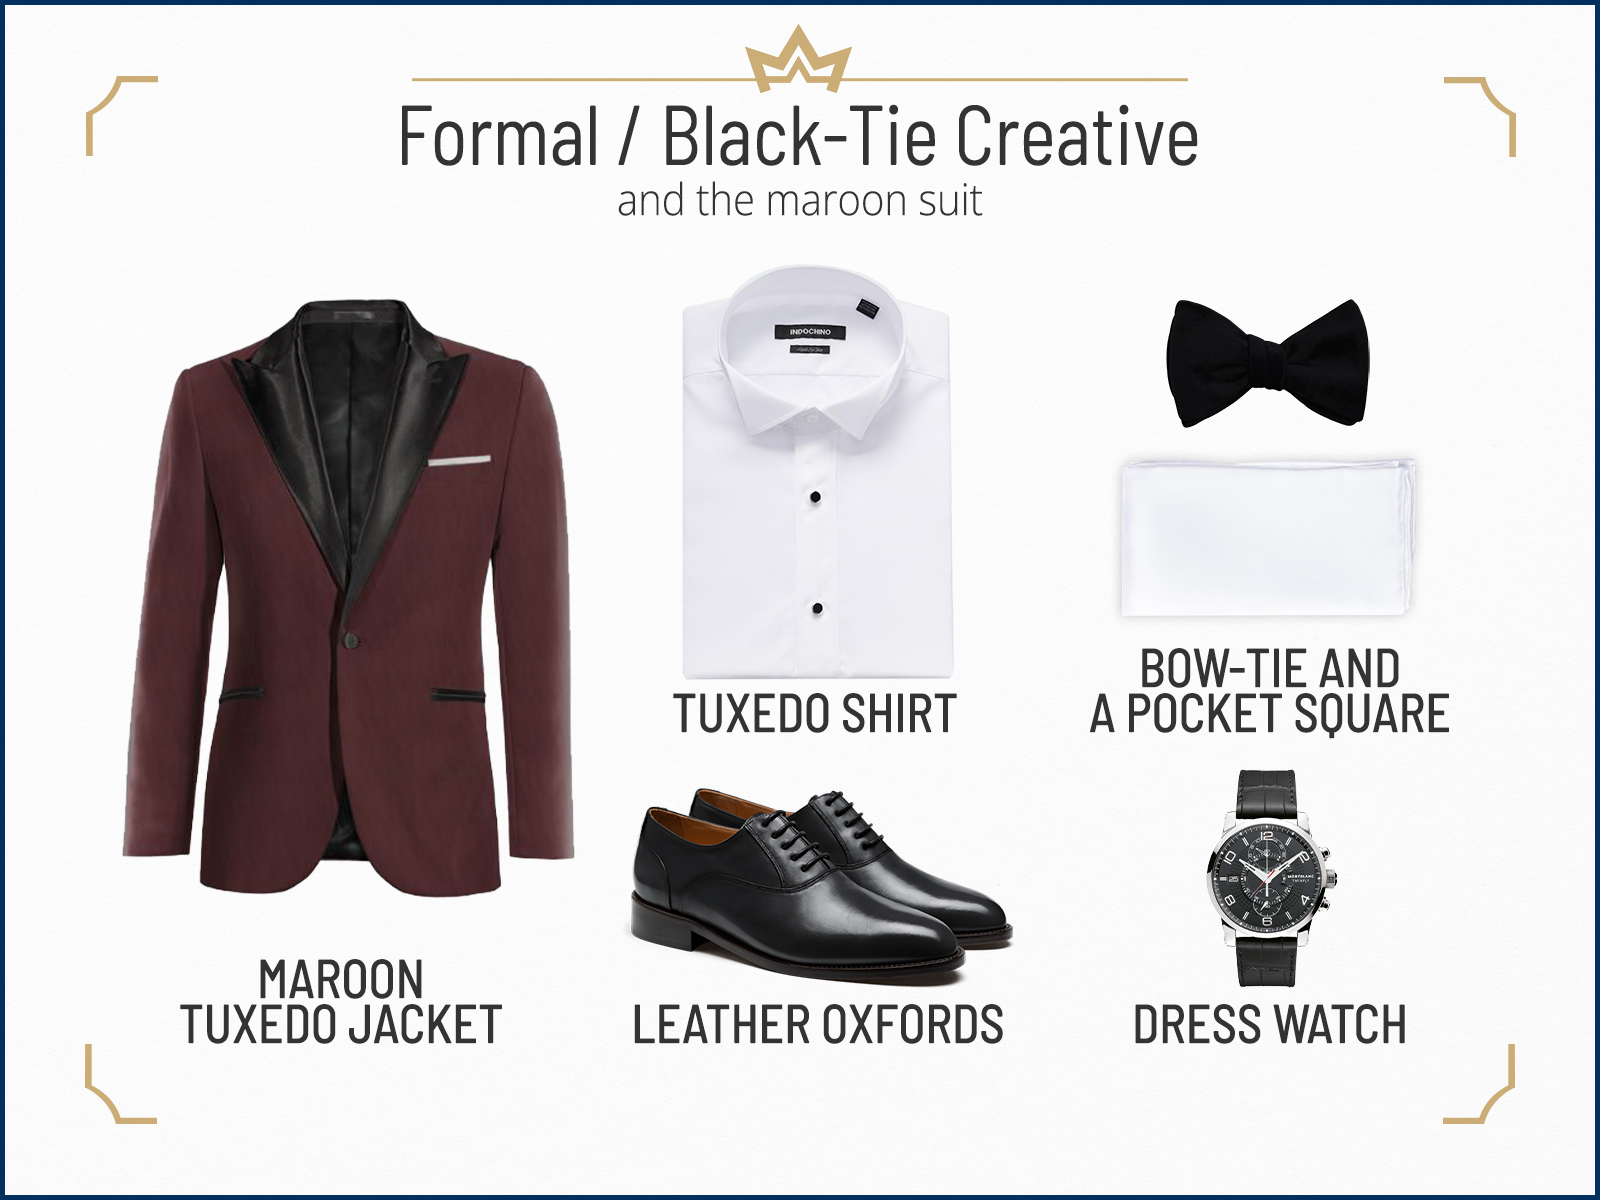 How to pair the maroon suit to a formal black-tie event